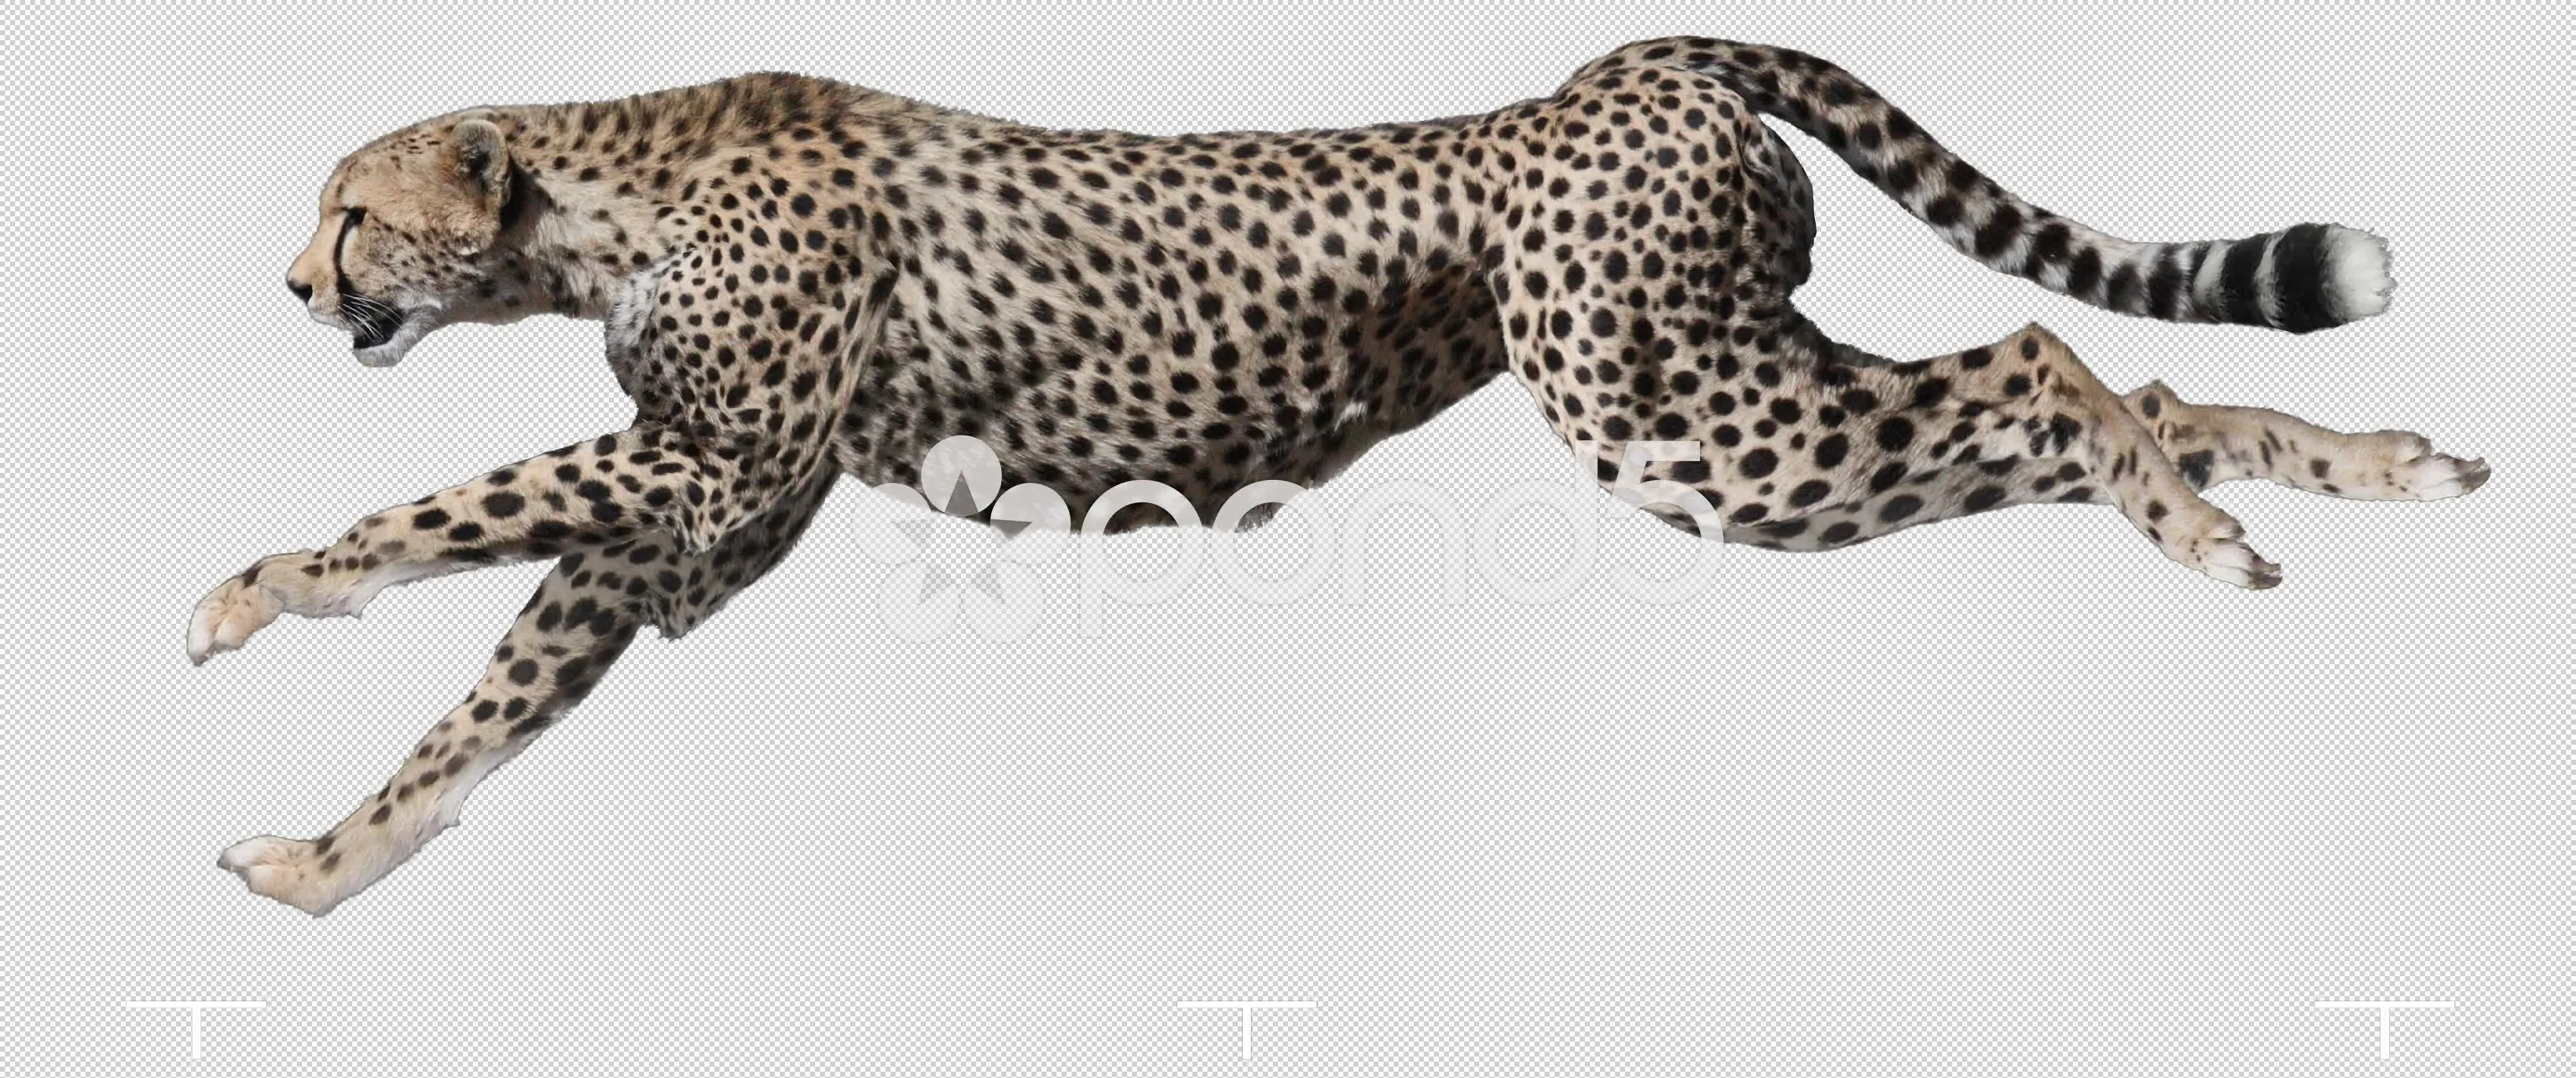 Cheetah running. Animal isolated and inc... | Stock Video | Pond5